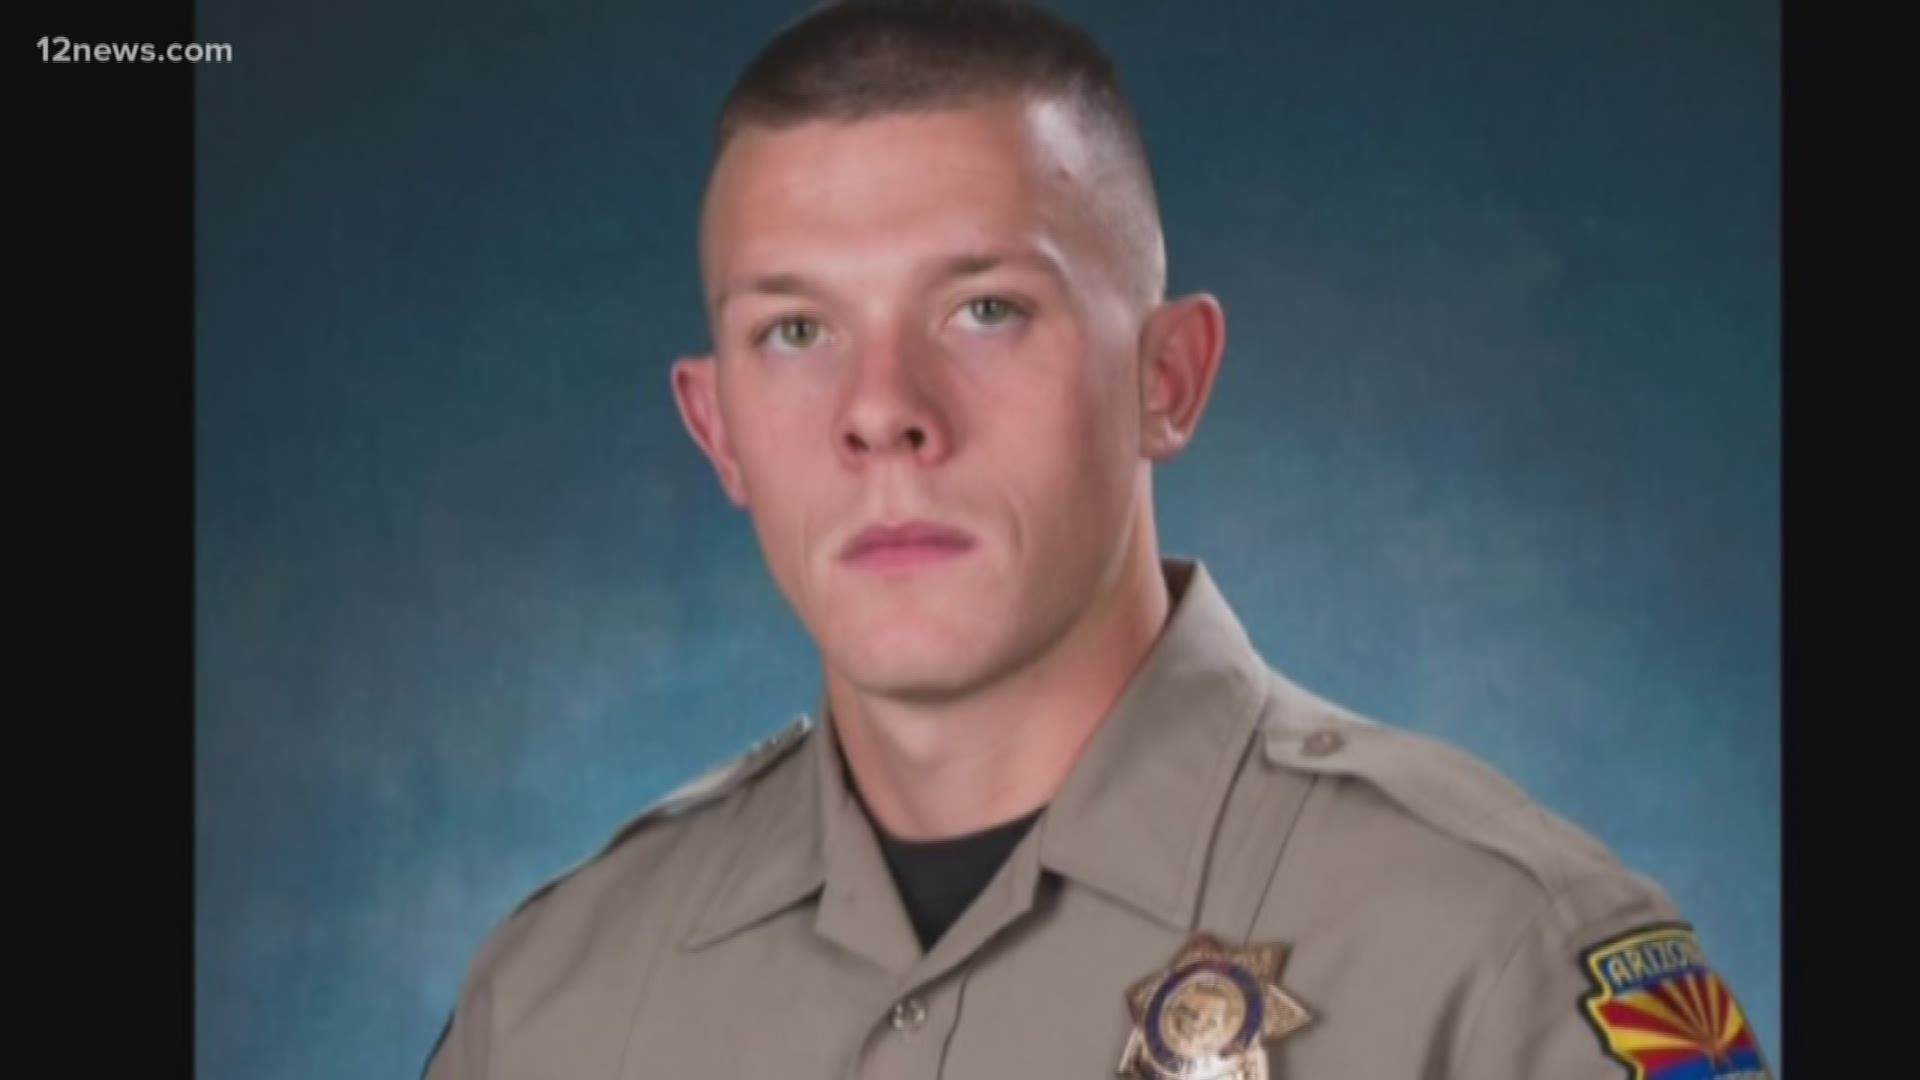 Tyler Edenhofer is the youngest DPS trooper to be killed in the line of duty, and he was remembered in a touching ceremony today. Tyler died during a struggle with suspect Issac King on I-10.